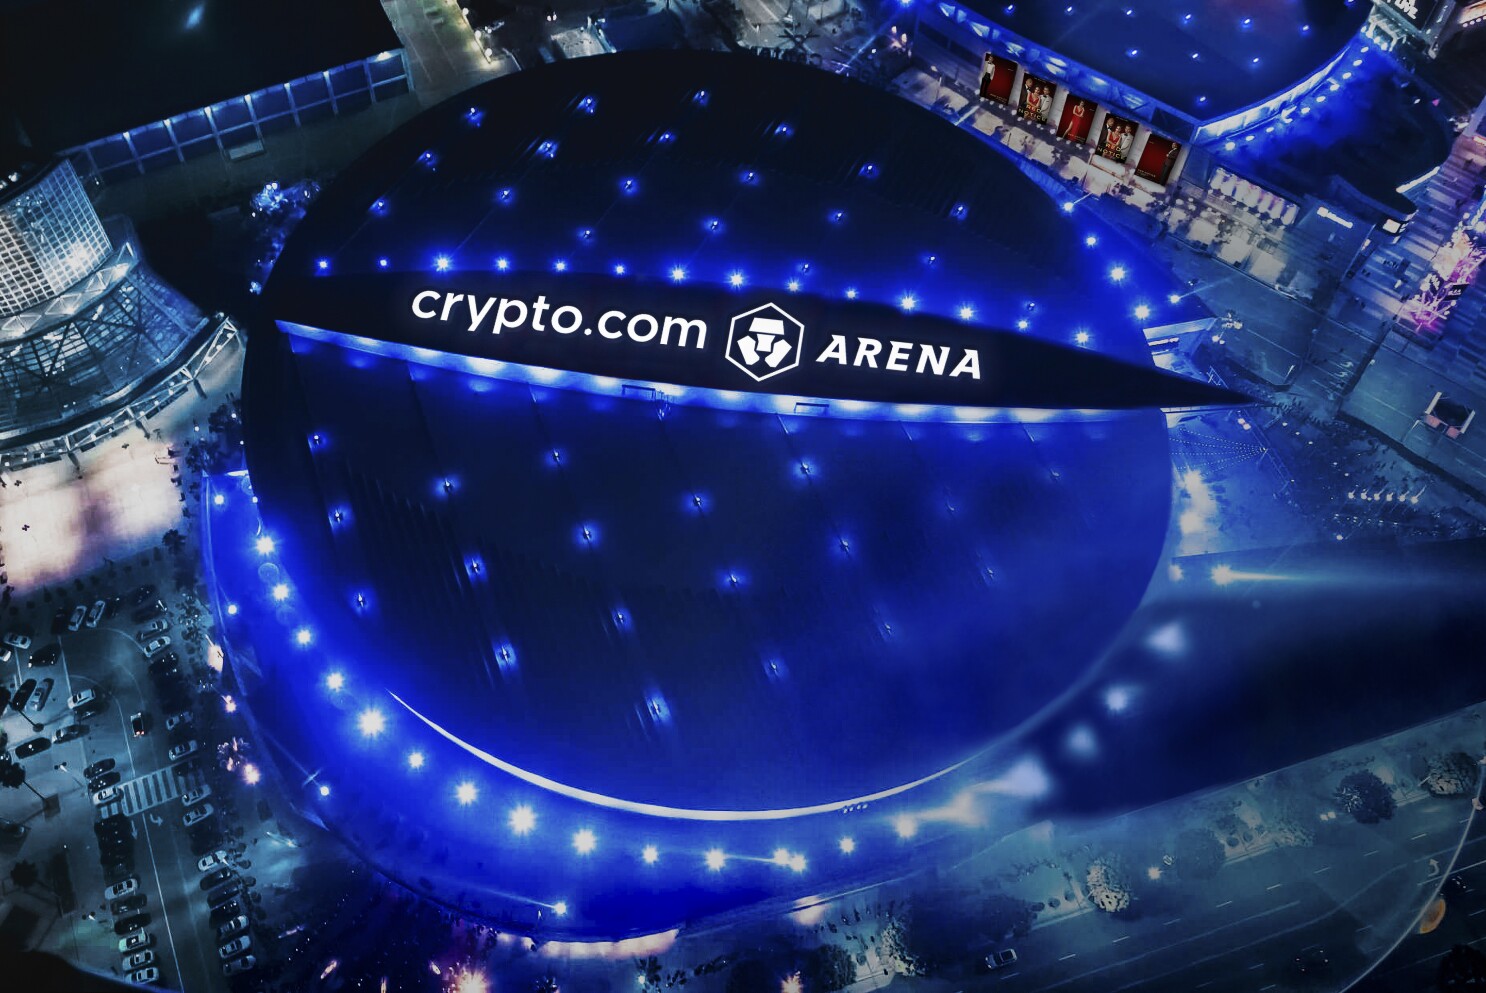 Staples Center becomes Crypto.com Arena in name rights deal - Los Angeles  Times